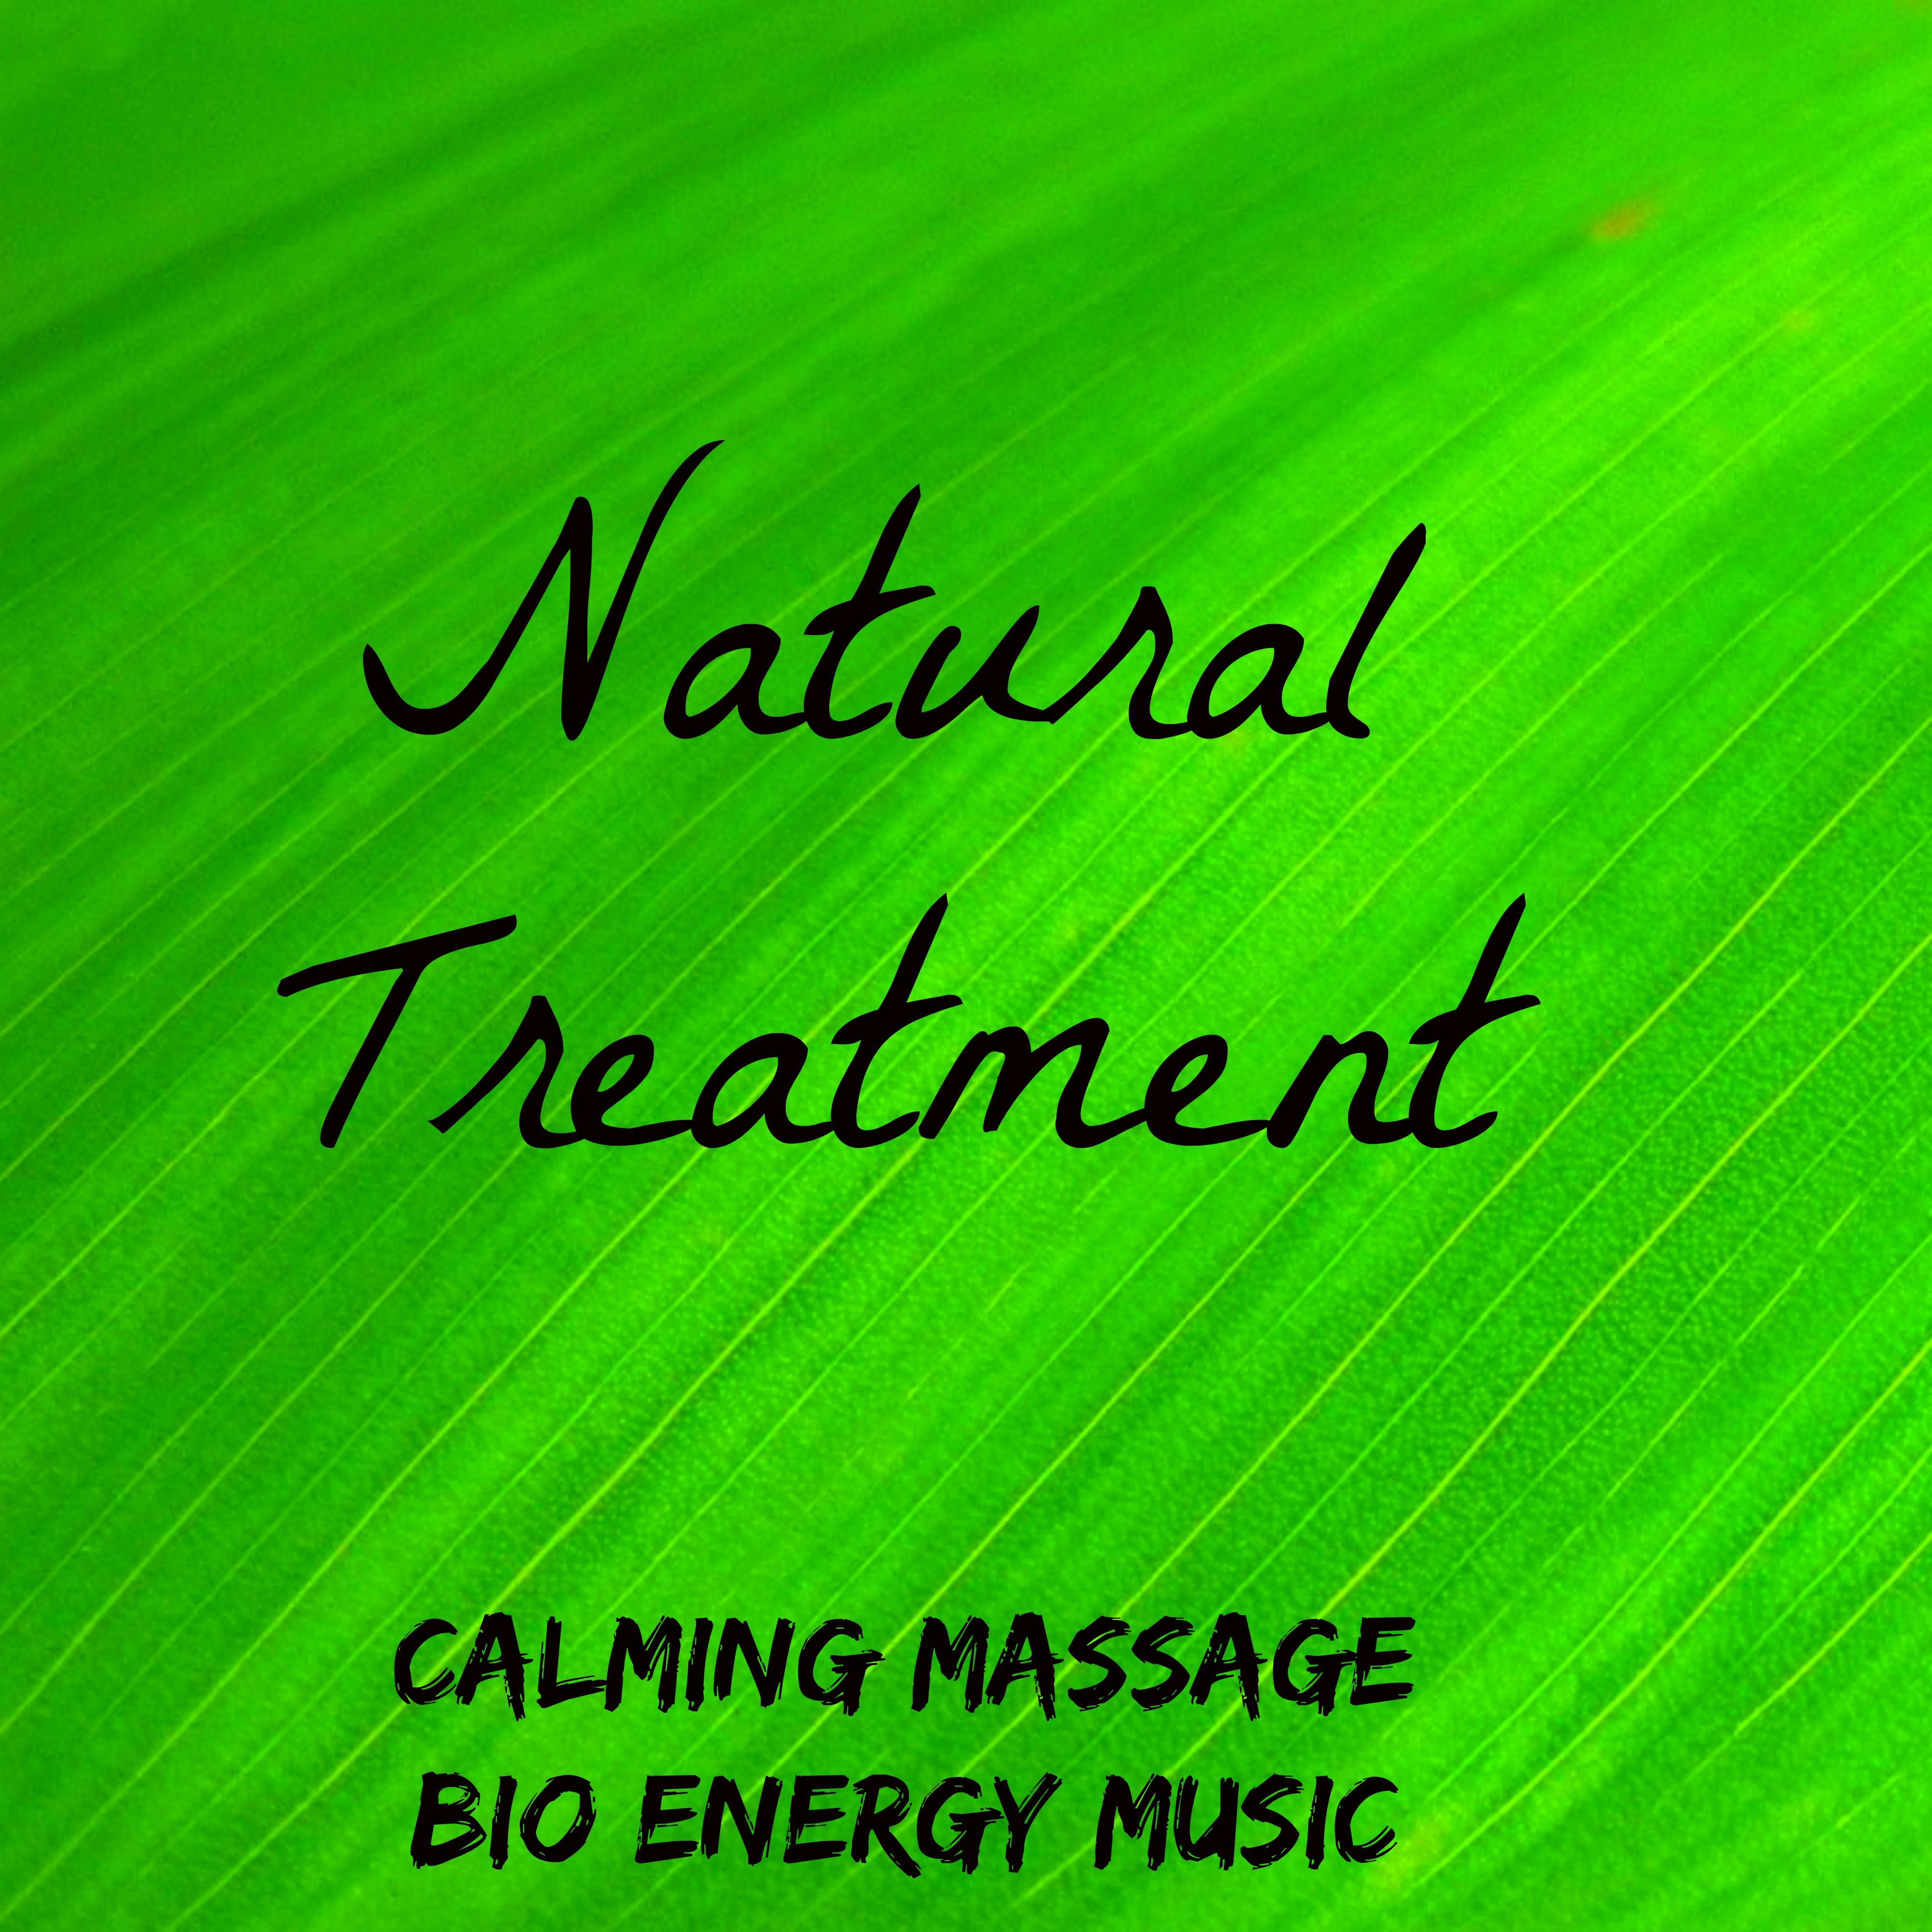 Natural Treatment - Calming Massage Bio Energy Music for Deep Sleep Meditation Therapy with Nature new Age Instrumental Sounds